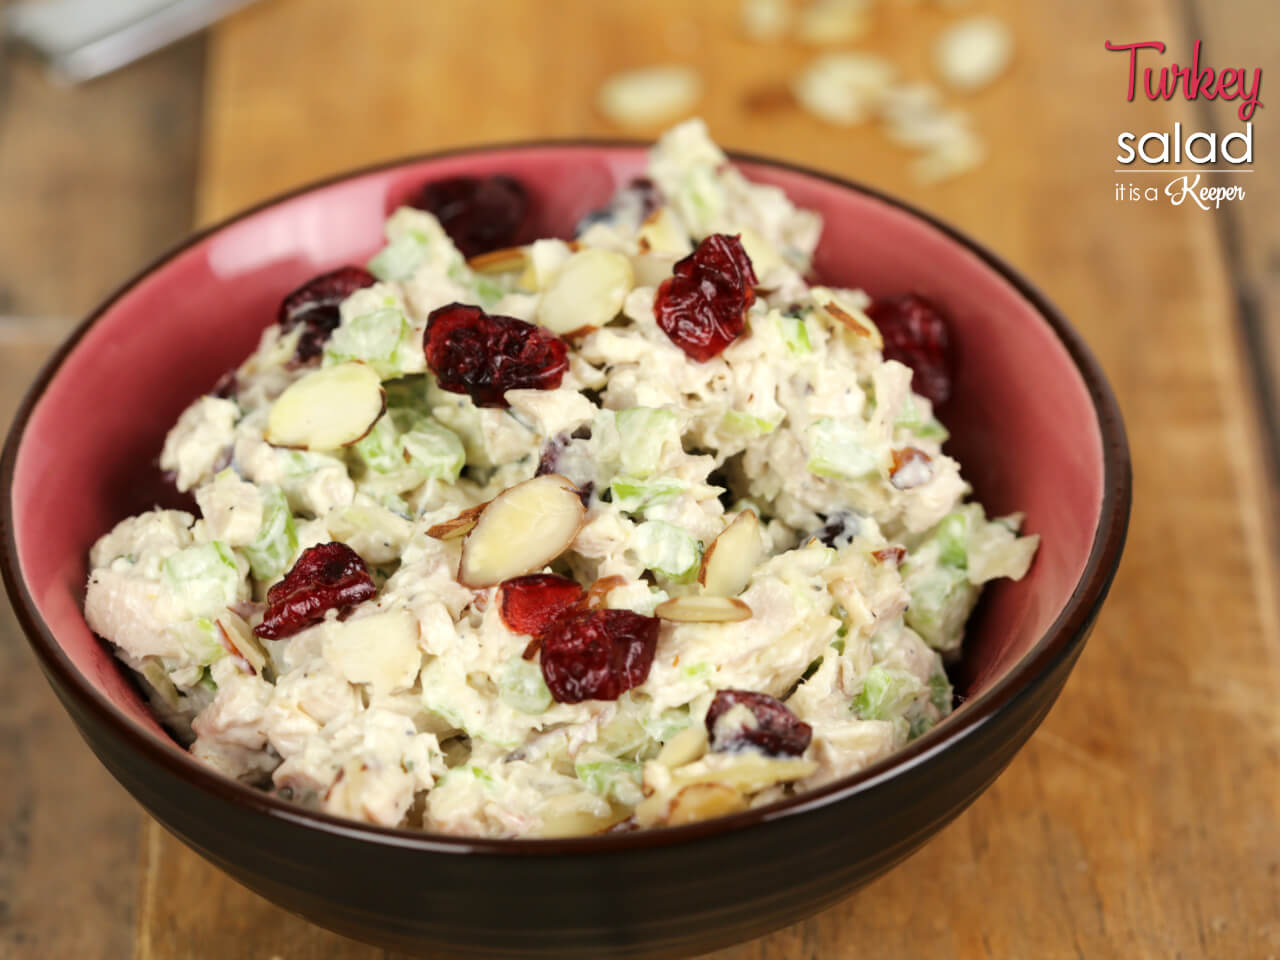 Turkey Salad - this easy recipe is a great way to use Thanksgiving leftovers